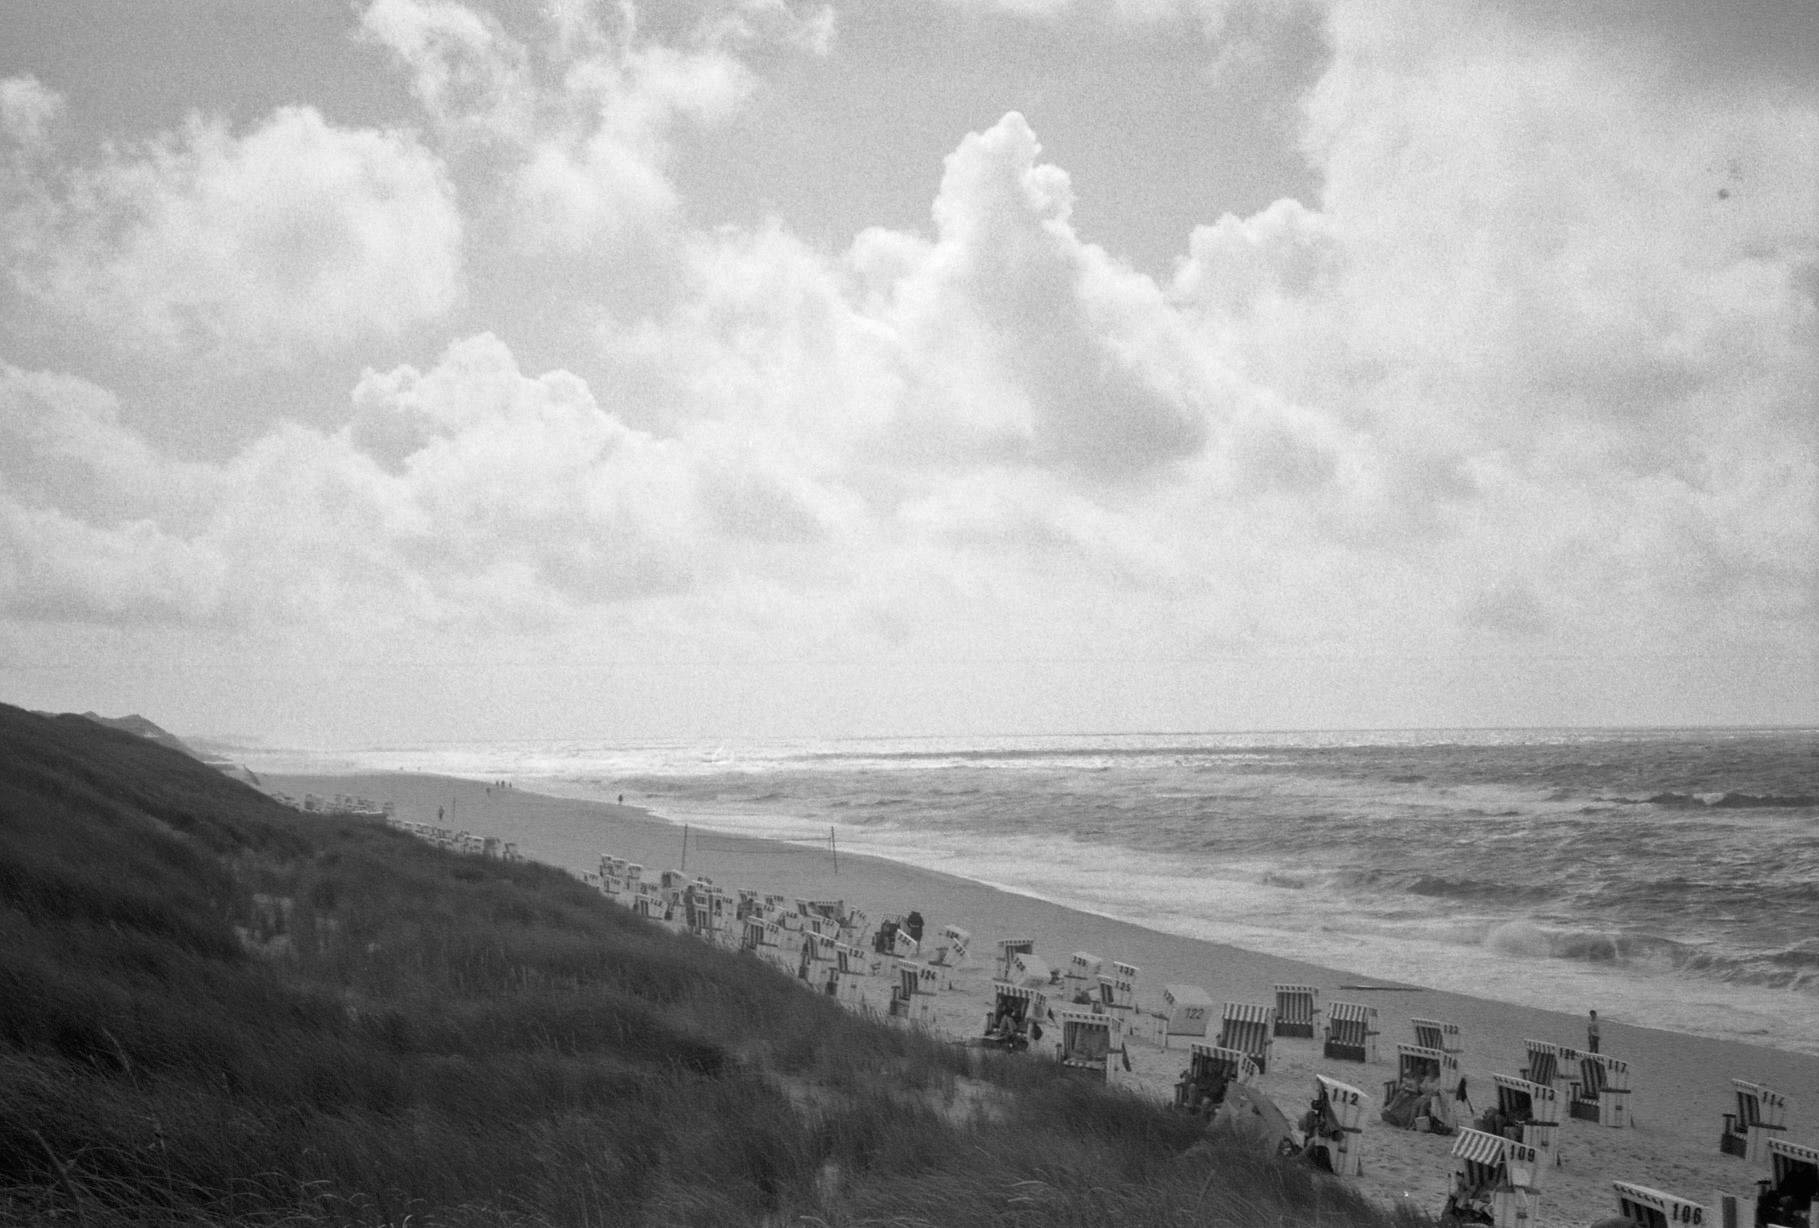 wavy see, the beach with basket chairs scattered around and the grassland behind under the bright cloudy sky